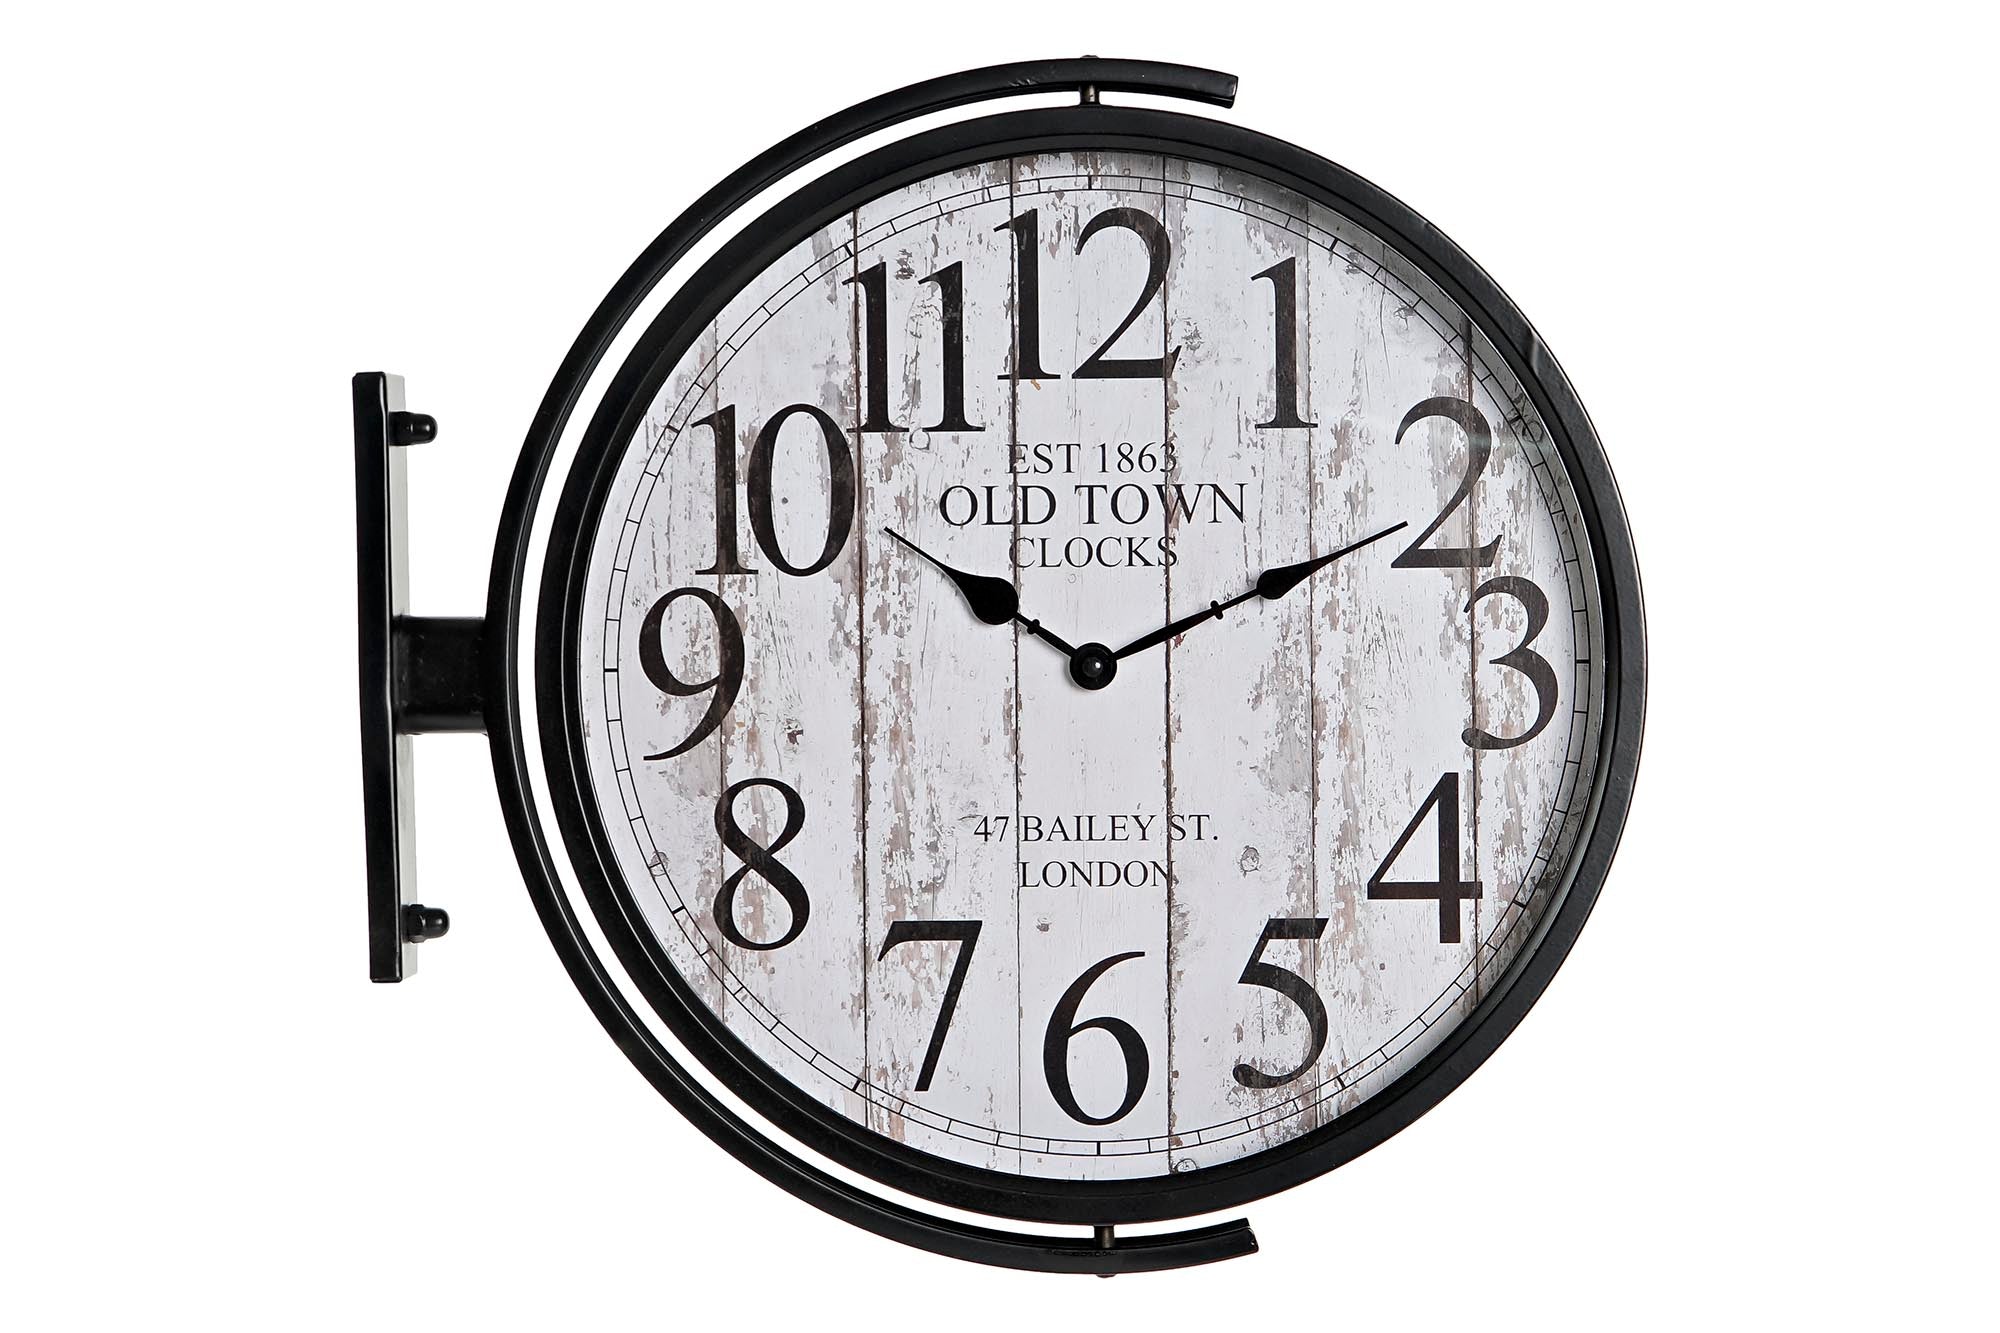 Old Town clock